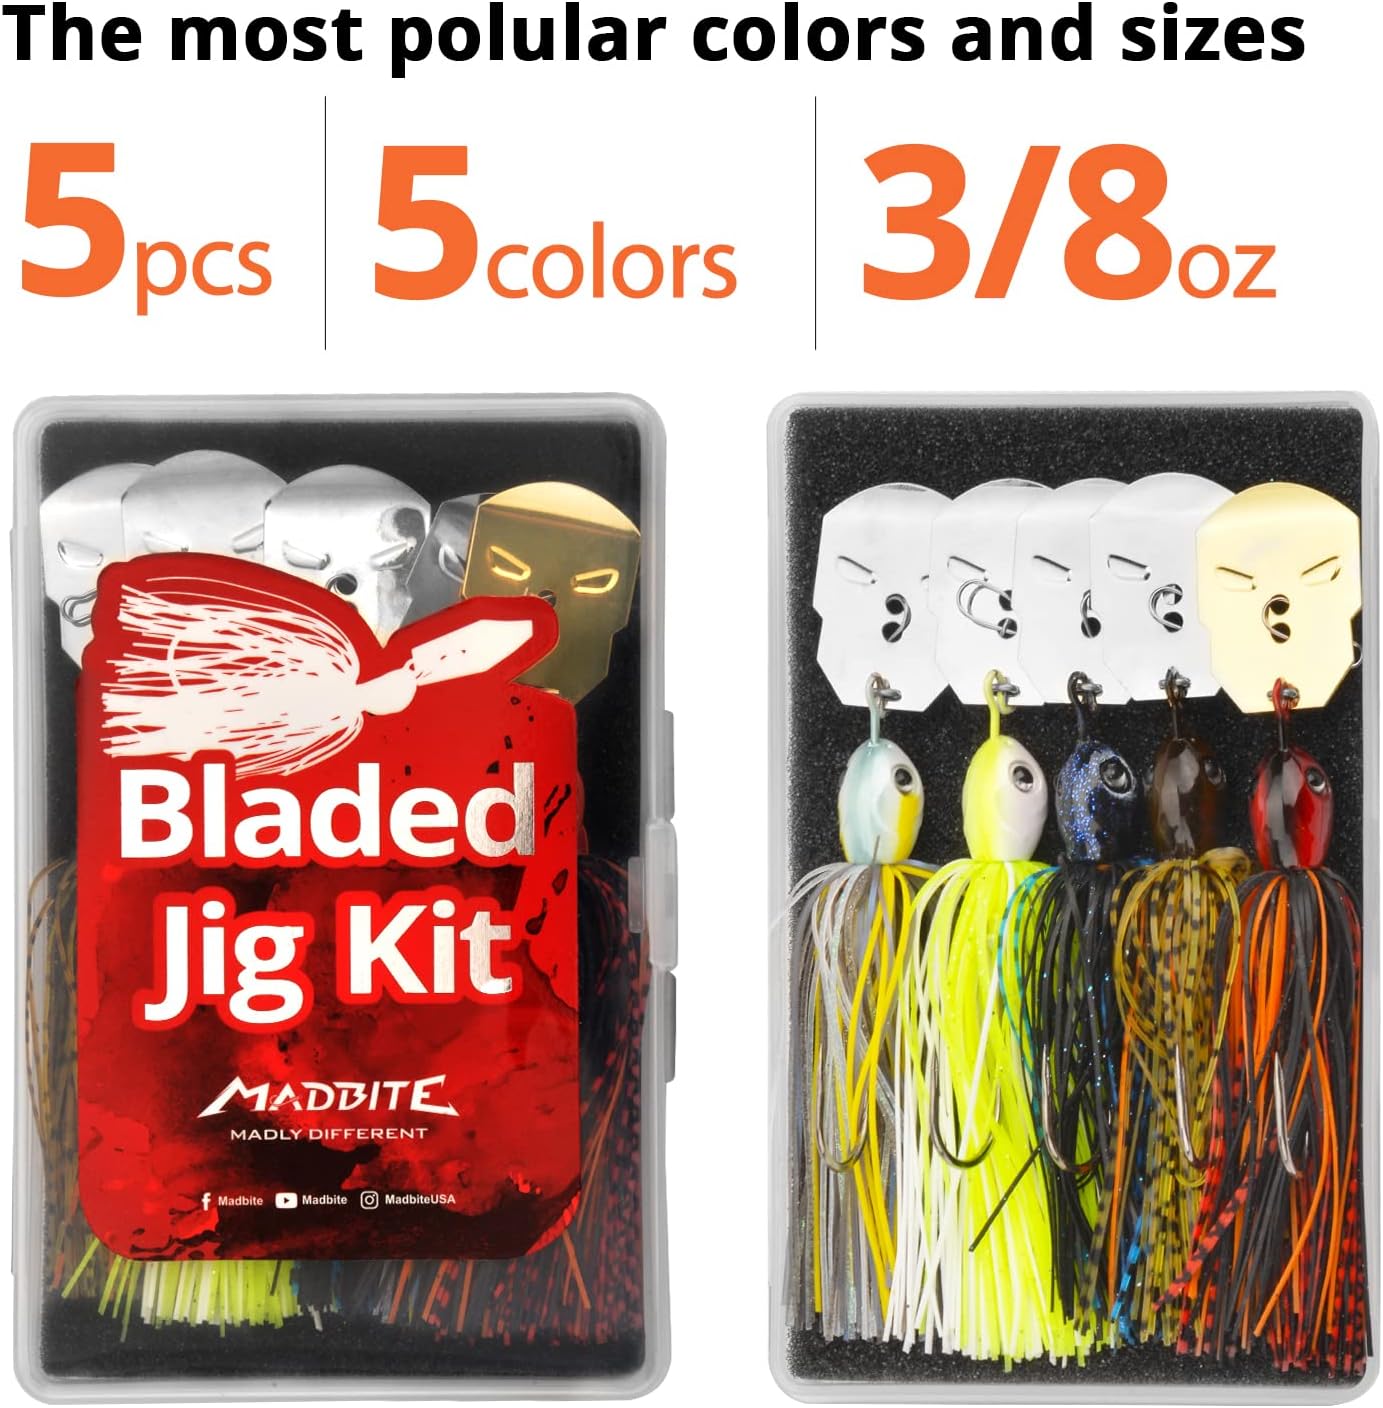 Bladed Jig Fishing Lures, 5 Pc Multi-Color Kits, Irresistible Vibrating Action, Sticky-Sharp Heavy-Wire Needle Point Hooks, Popular 3/8 Oz